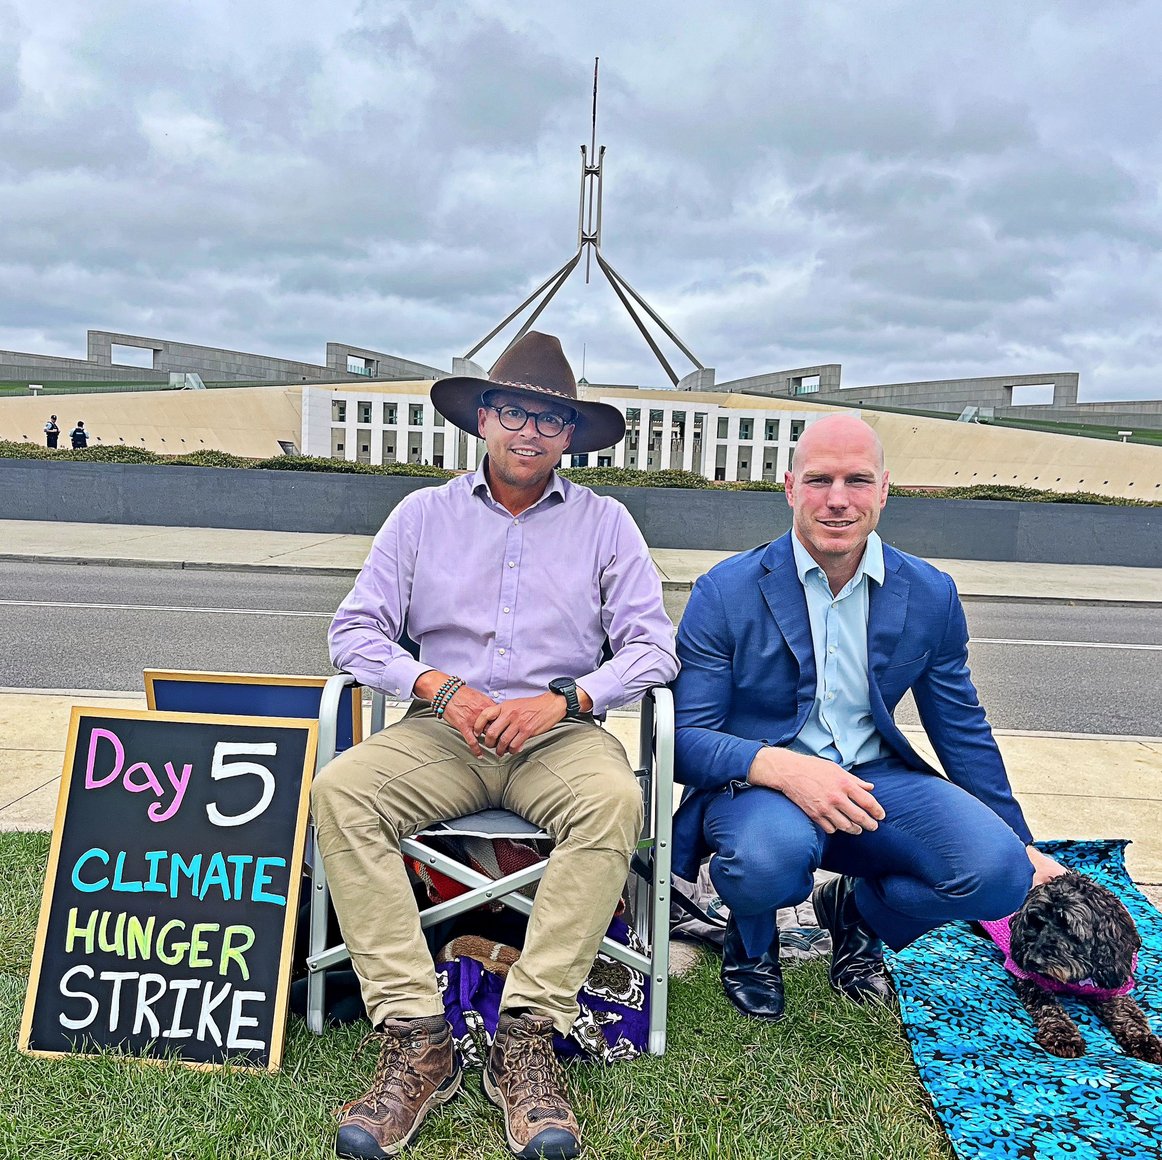 I'm not sure what is more disturbing. A narcissist nutjob thinking that going without soy beans and lentils will change the earth's climate or watching a dim-witted politician awkwardly posing for social media likes. #ClimateHungerStrike #auspol